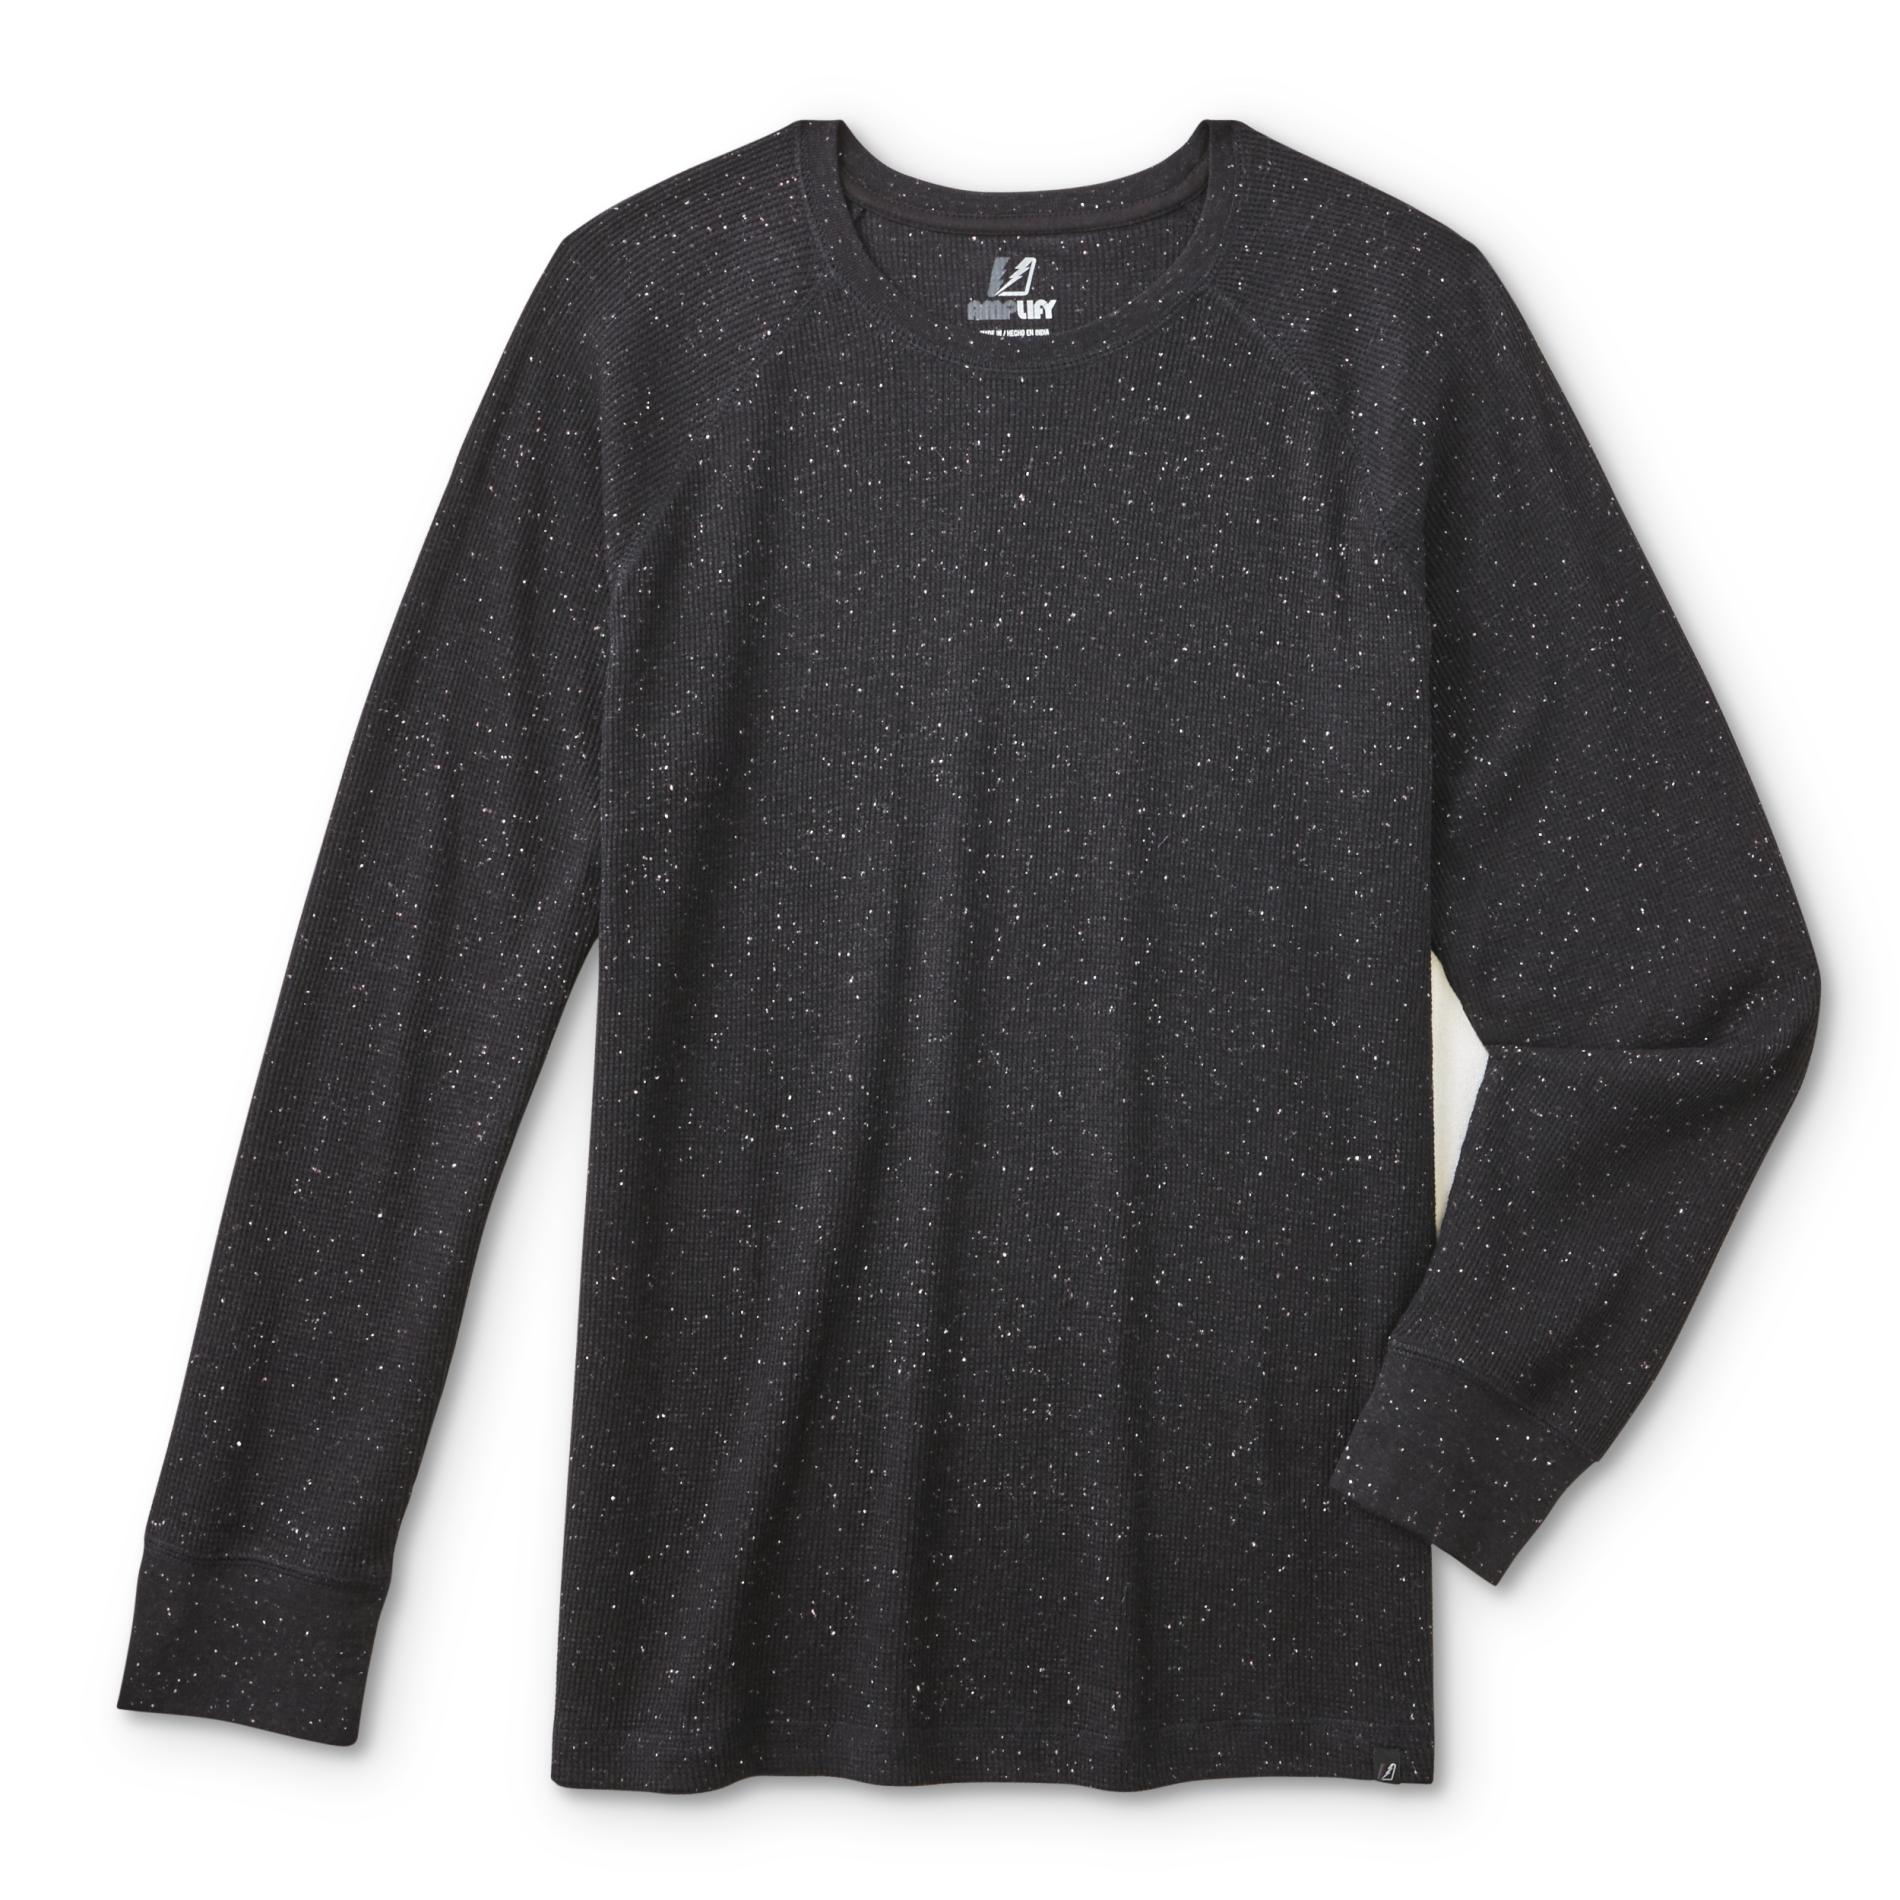 Amplify Young Men's Thermal Shirt - Speckled